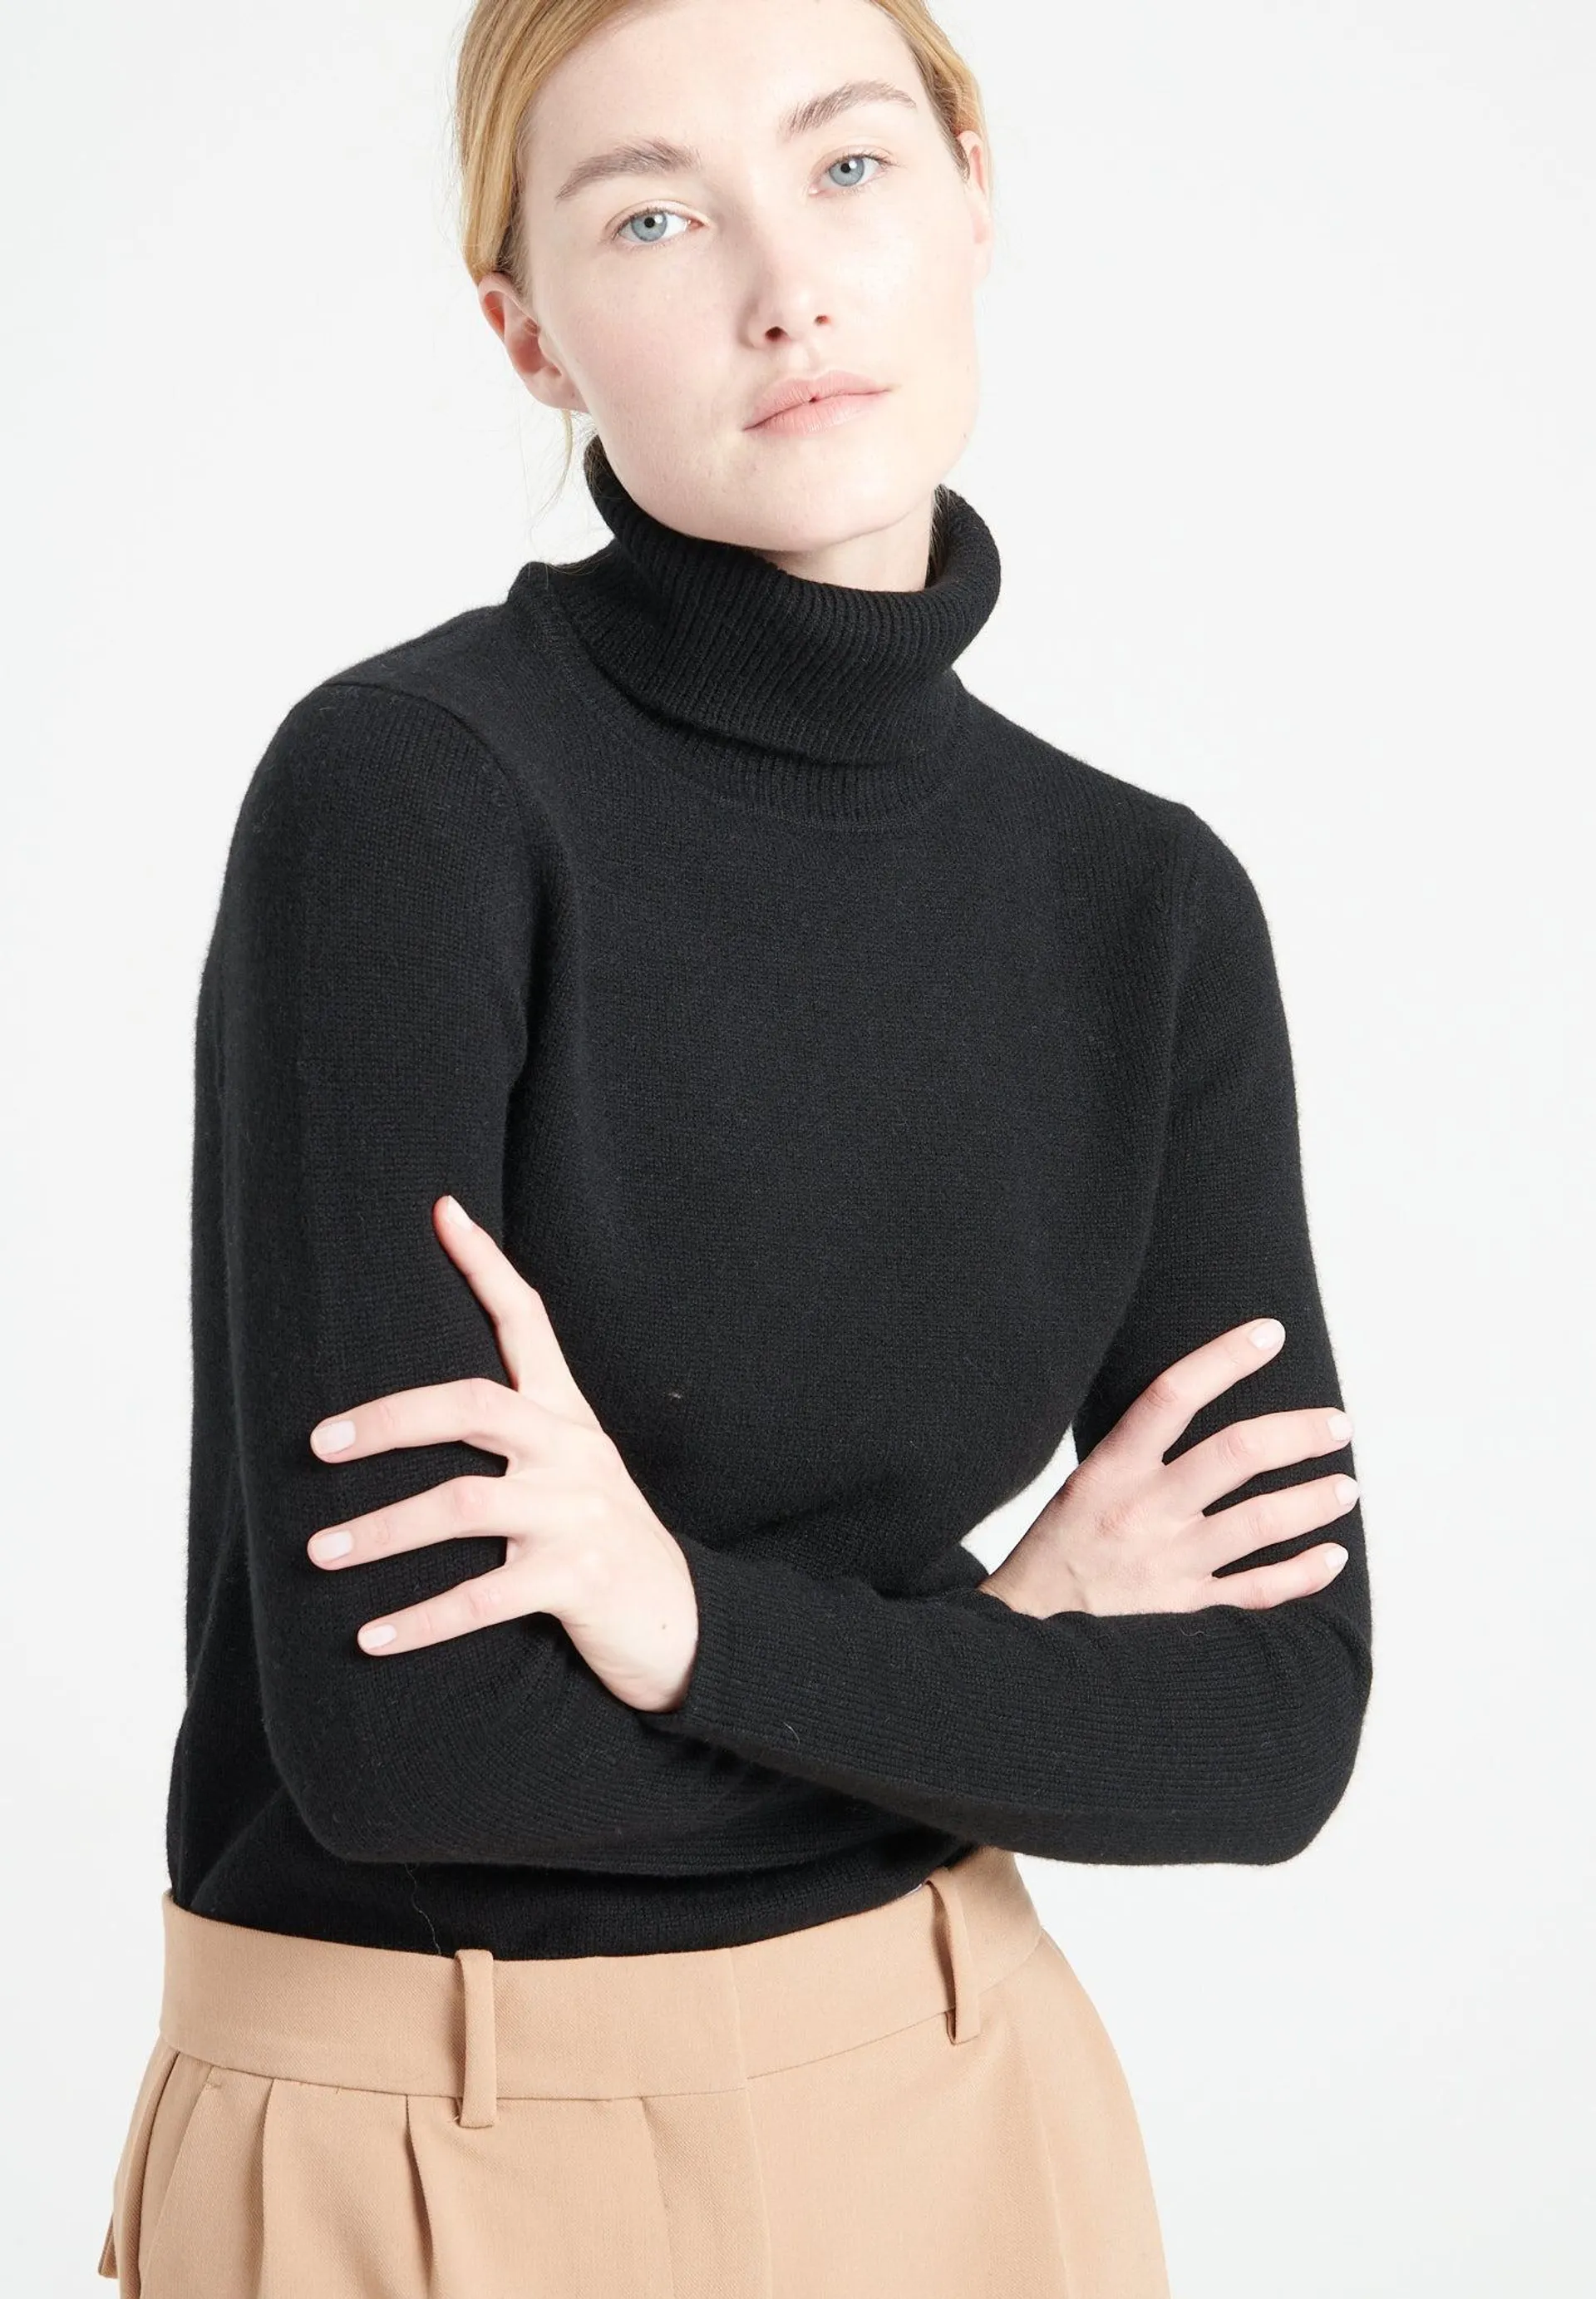 Pure Cashmere 4 Thread Turtleneck Sweater (Lilly 19)